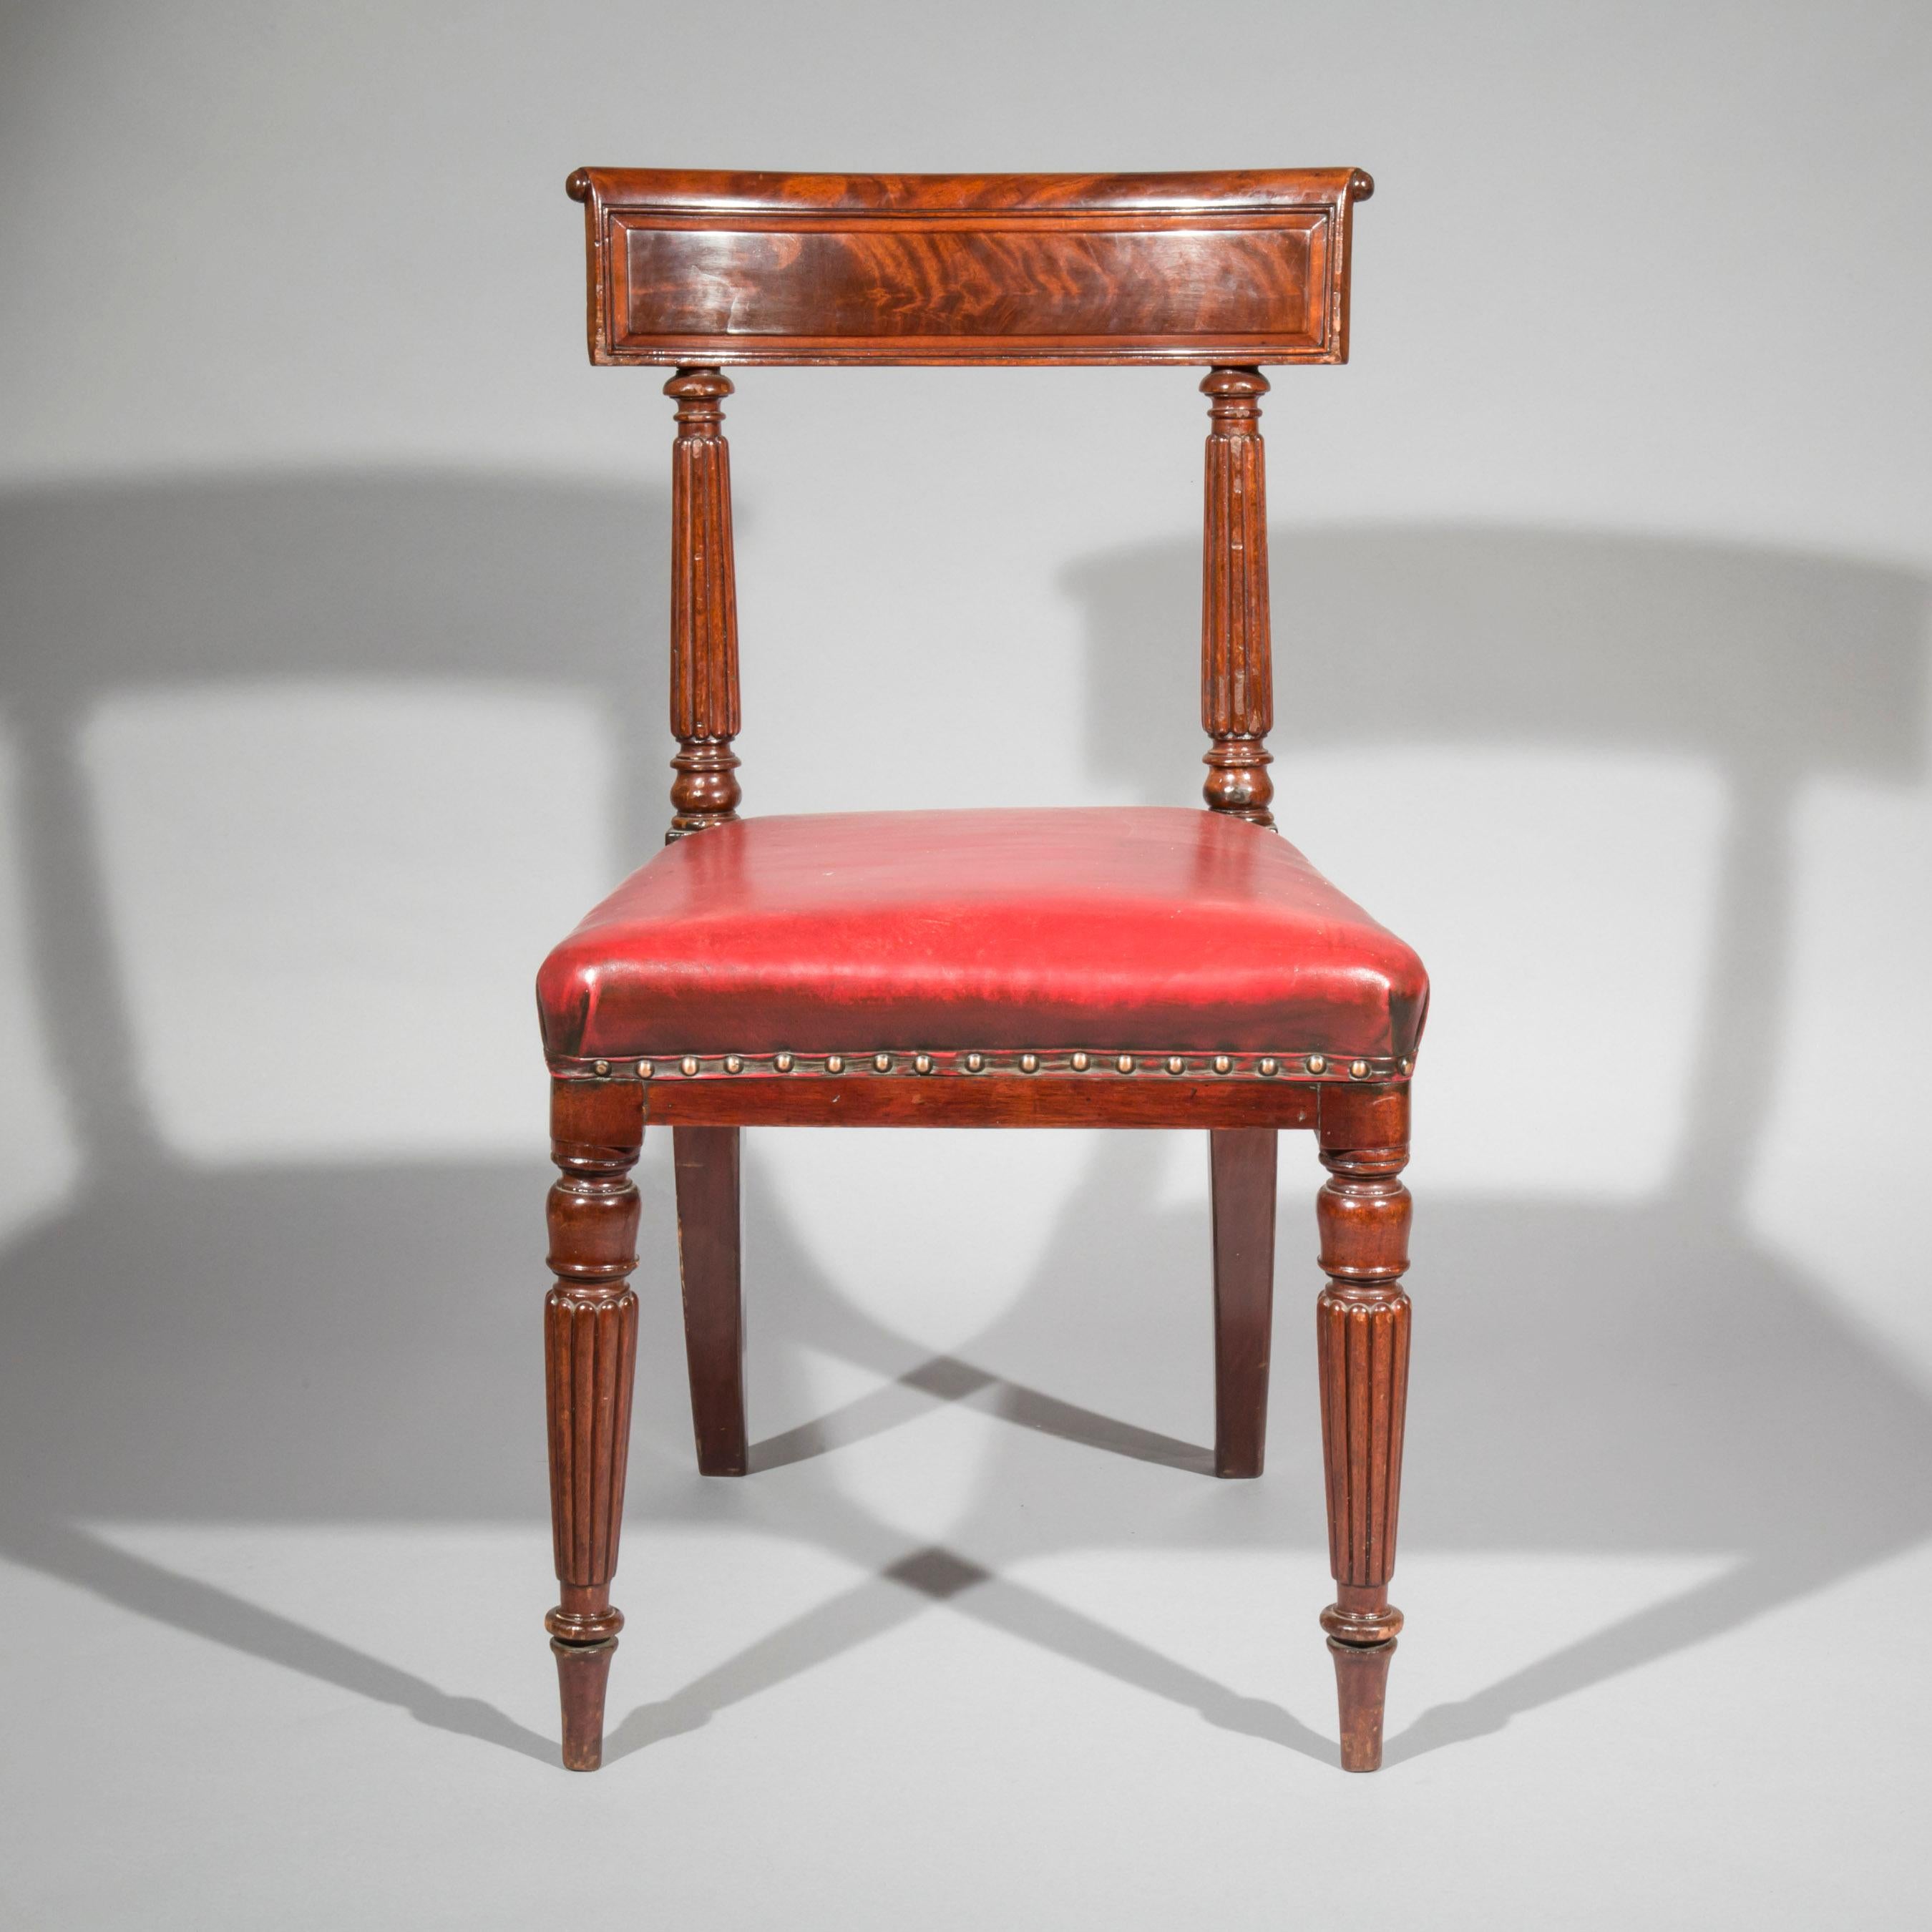 An interesting early 19th century Regency period side chair, in the manner of George Bullock, branded VR for the Royal household of Queen Victoria (1819-1901).

England, circa 1815-1820.

Why we like it
These superb quality, very stylish dining